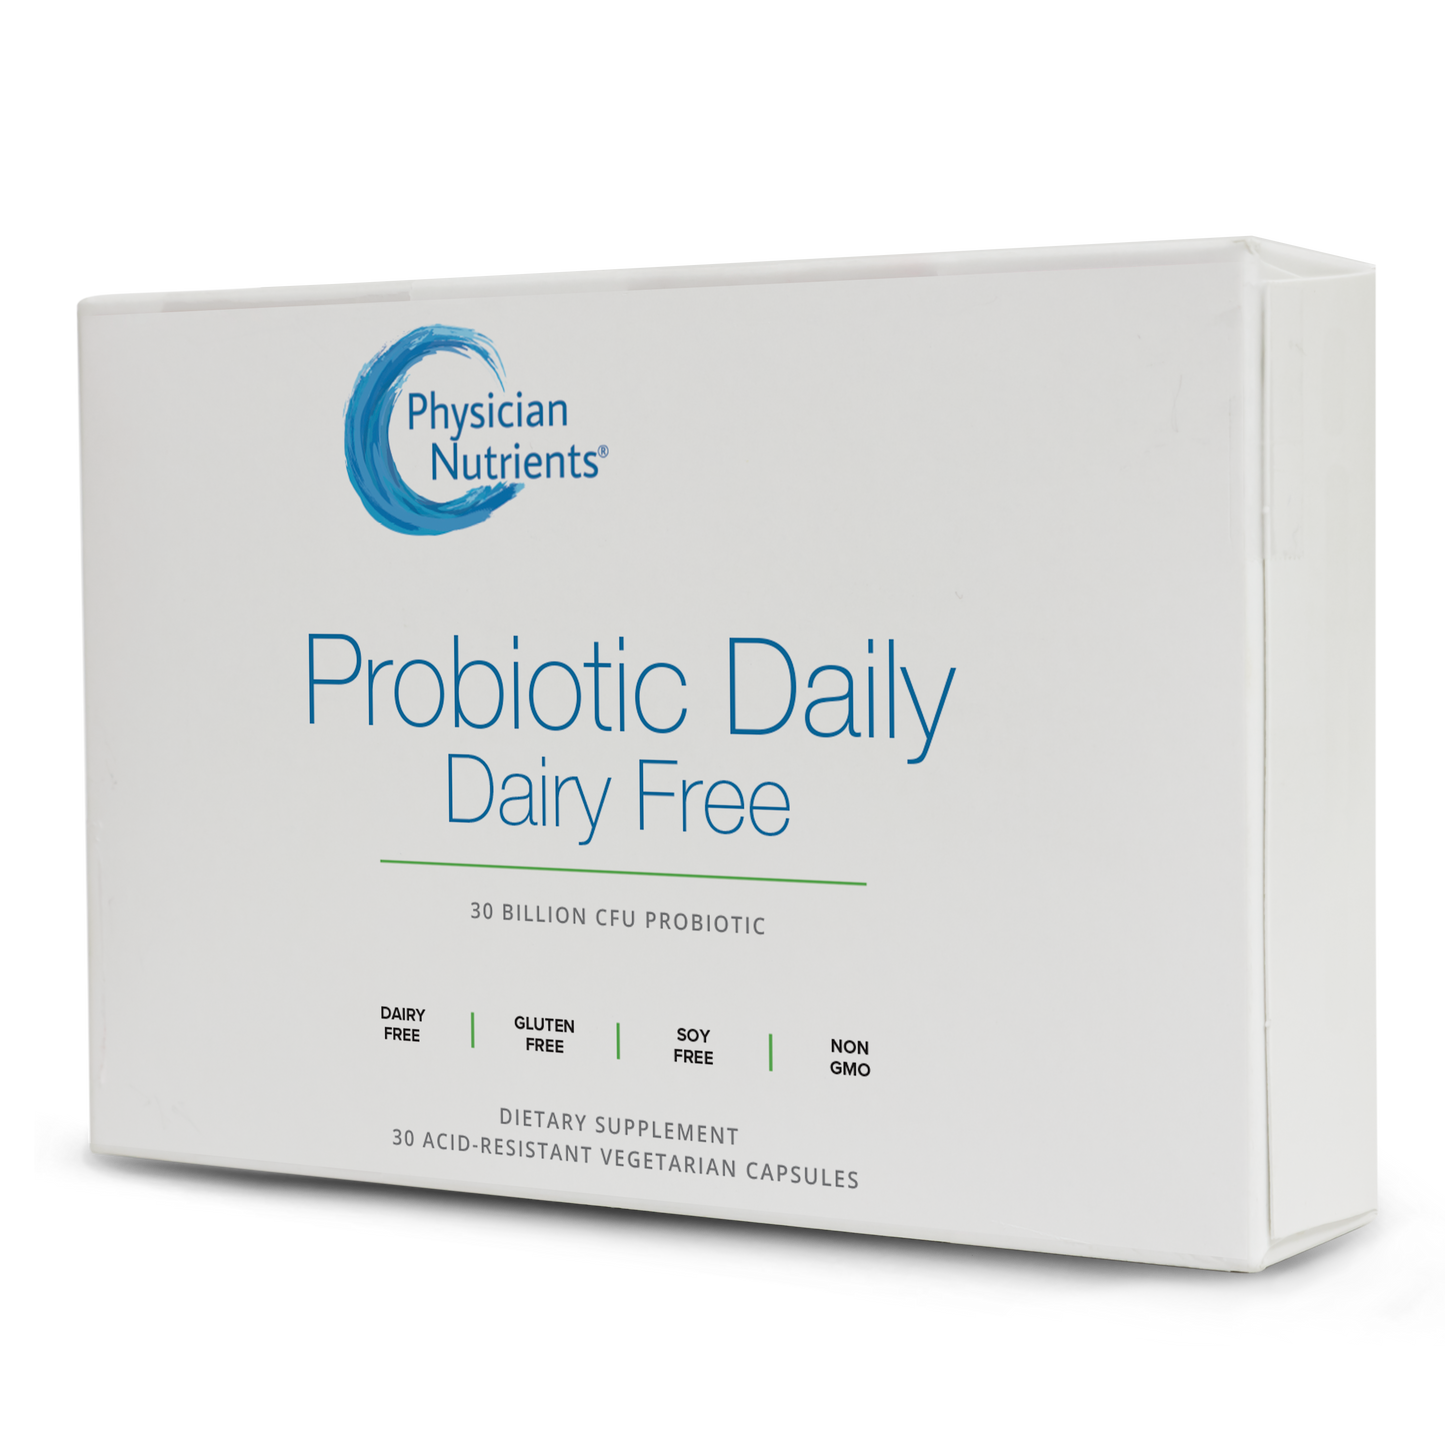 Physician Nutrients Probiotic Daily Dairy Free